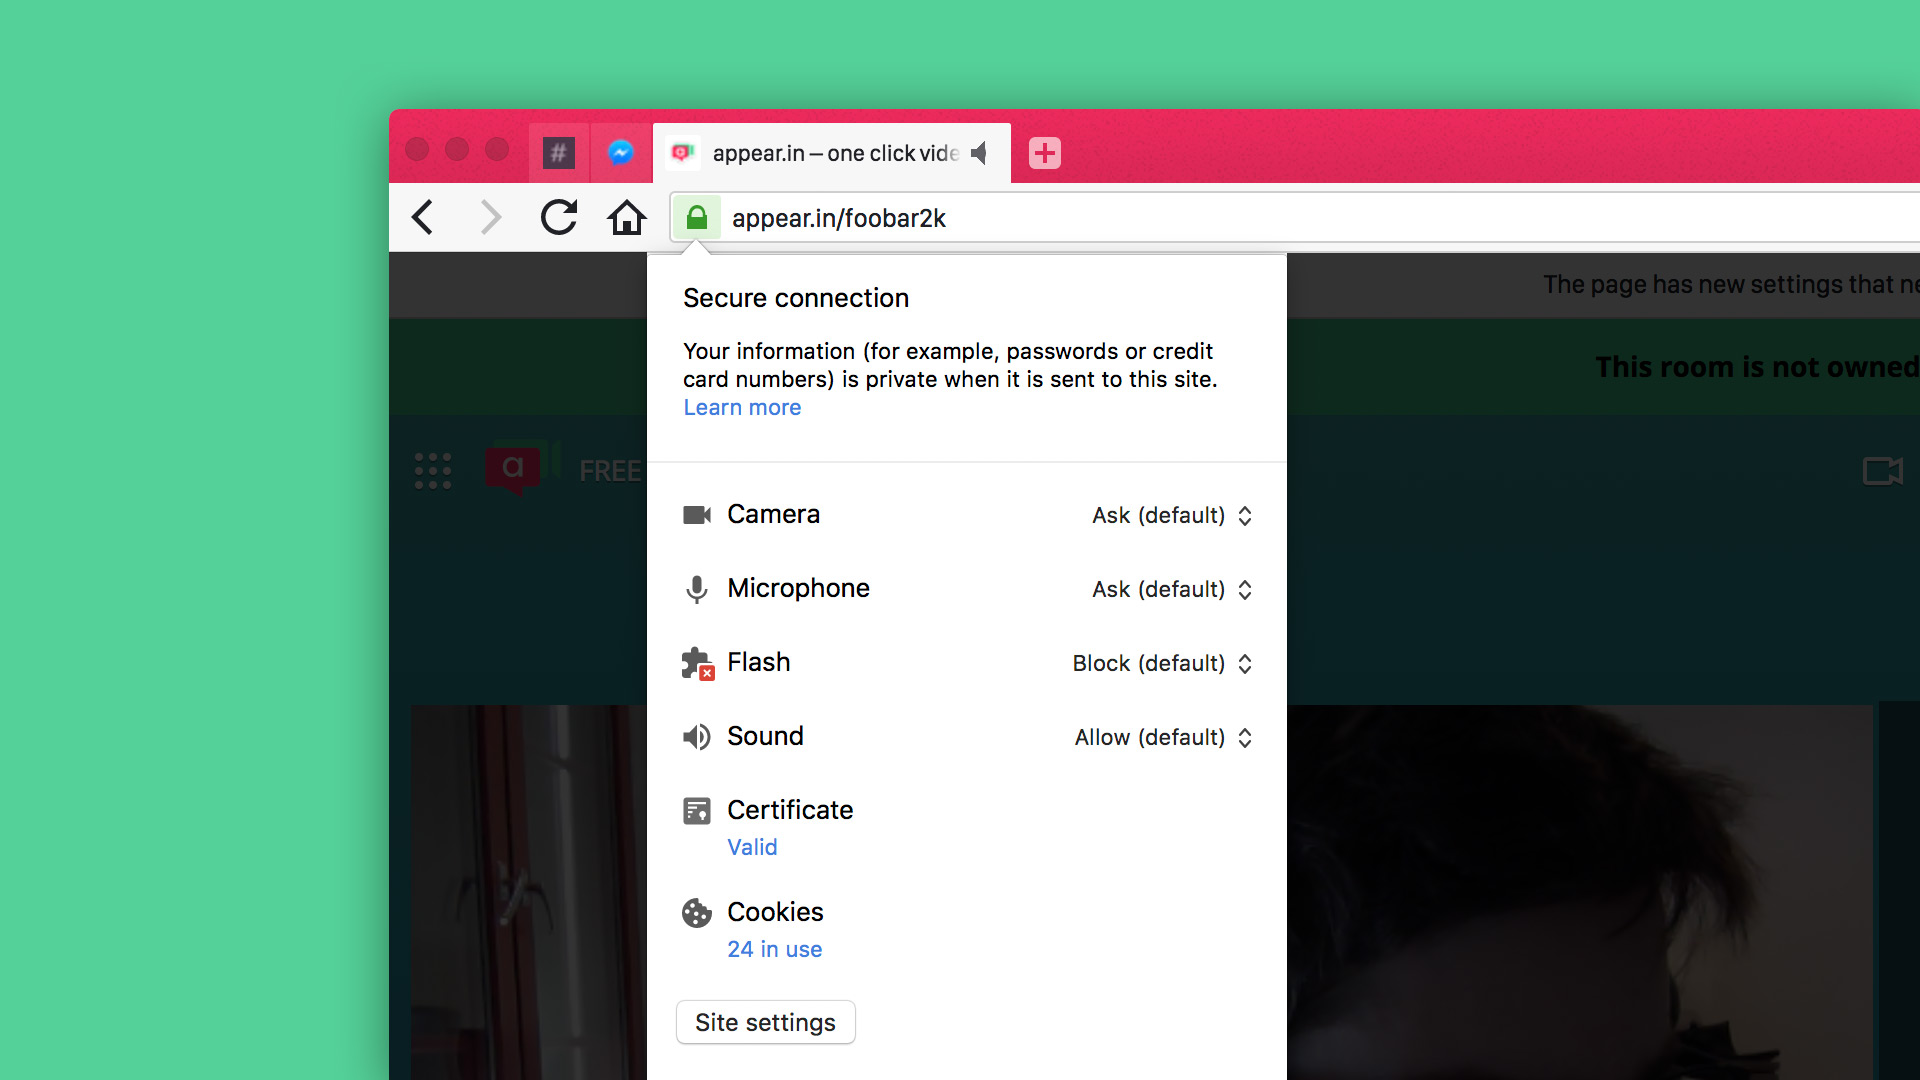 The site info pane in Vivaldi browser displaying site-specific permissions